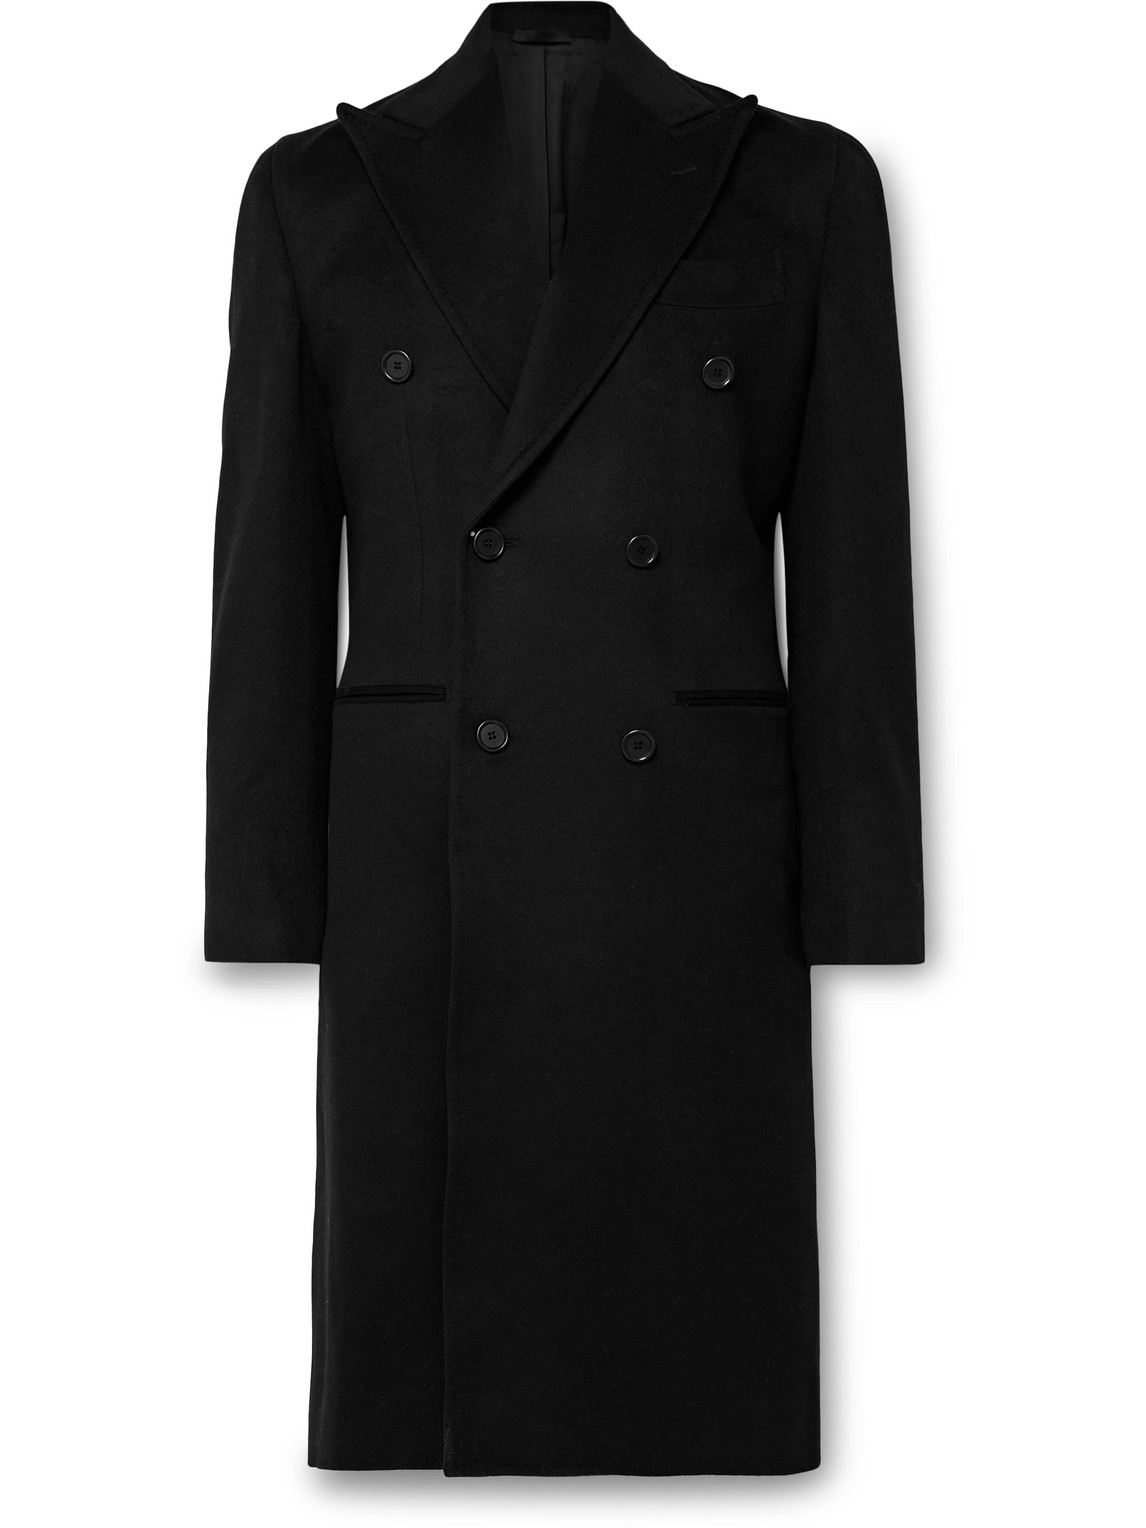 Slim-Fit Double-Breasted Wool and Cashmere-Blend Felt Overcoat